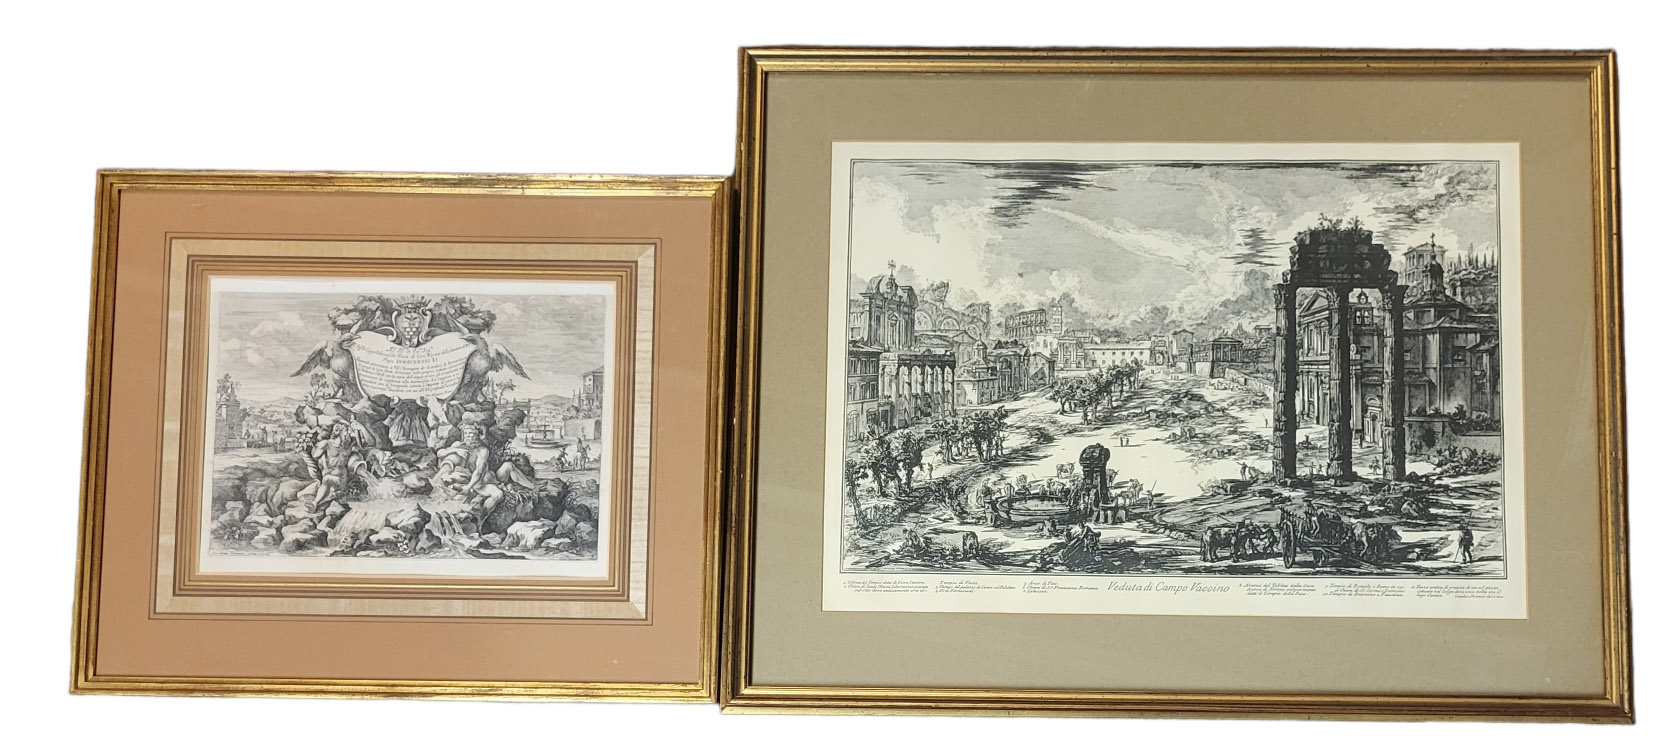 AFTER CAVALIER PIRANESI VENDUTA CAMPO VACCINO, A 20TH CENTURY BLACK AND WHITE ENGRAVING View of